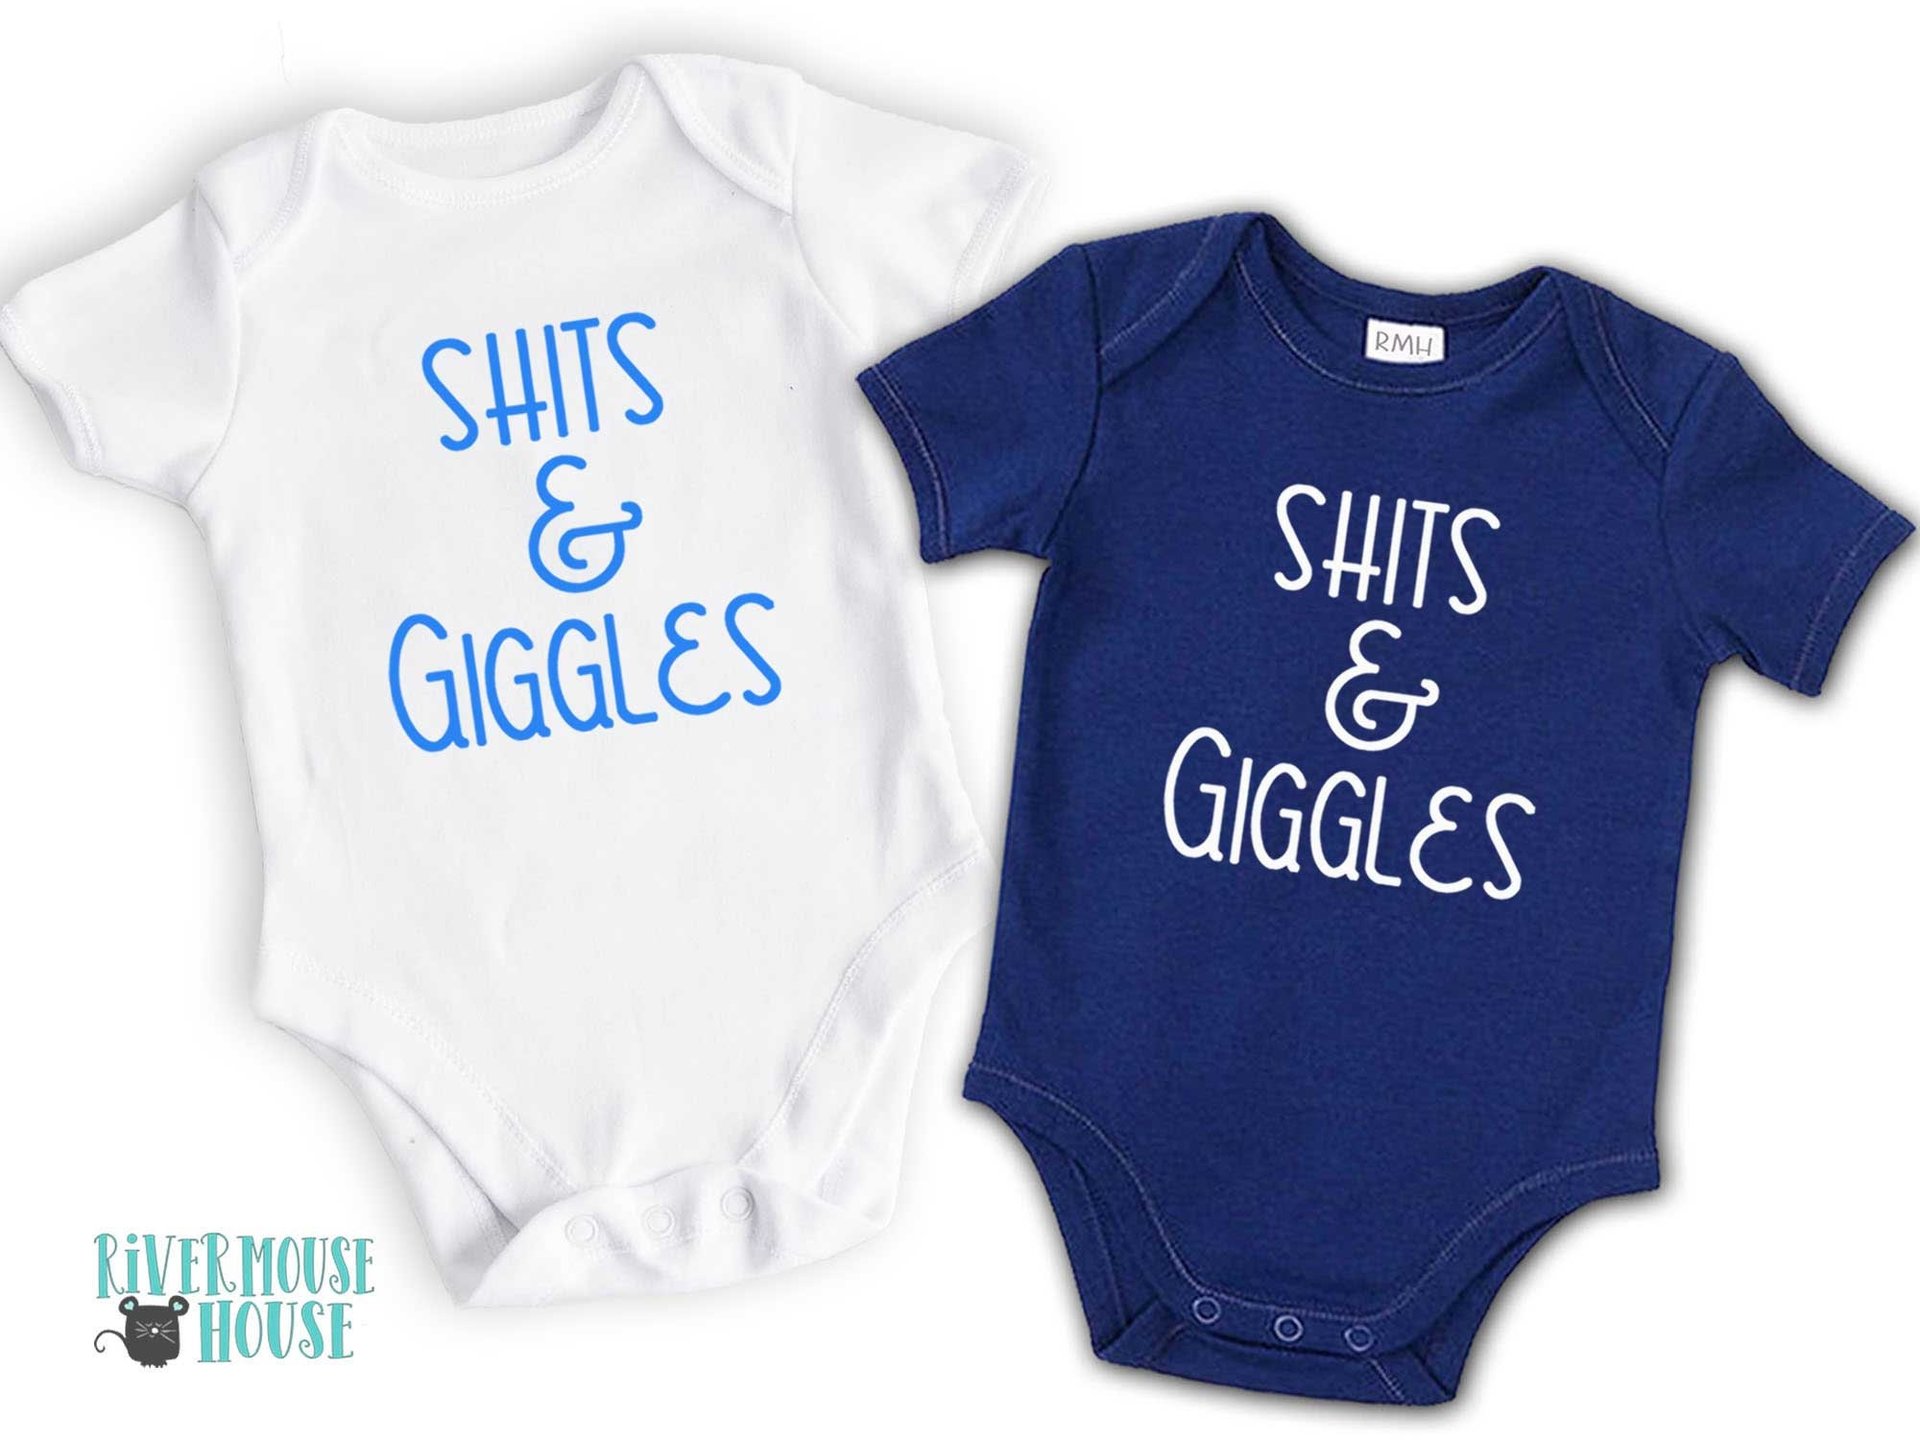 Shits & Giggles funny baby bodysuit, Australian sizes from newborn to toddler